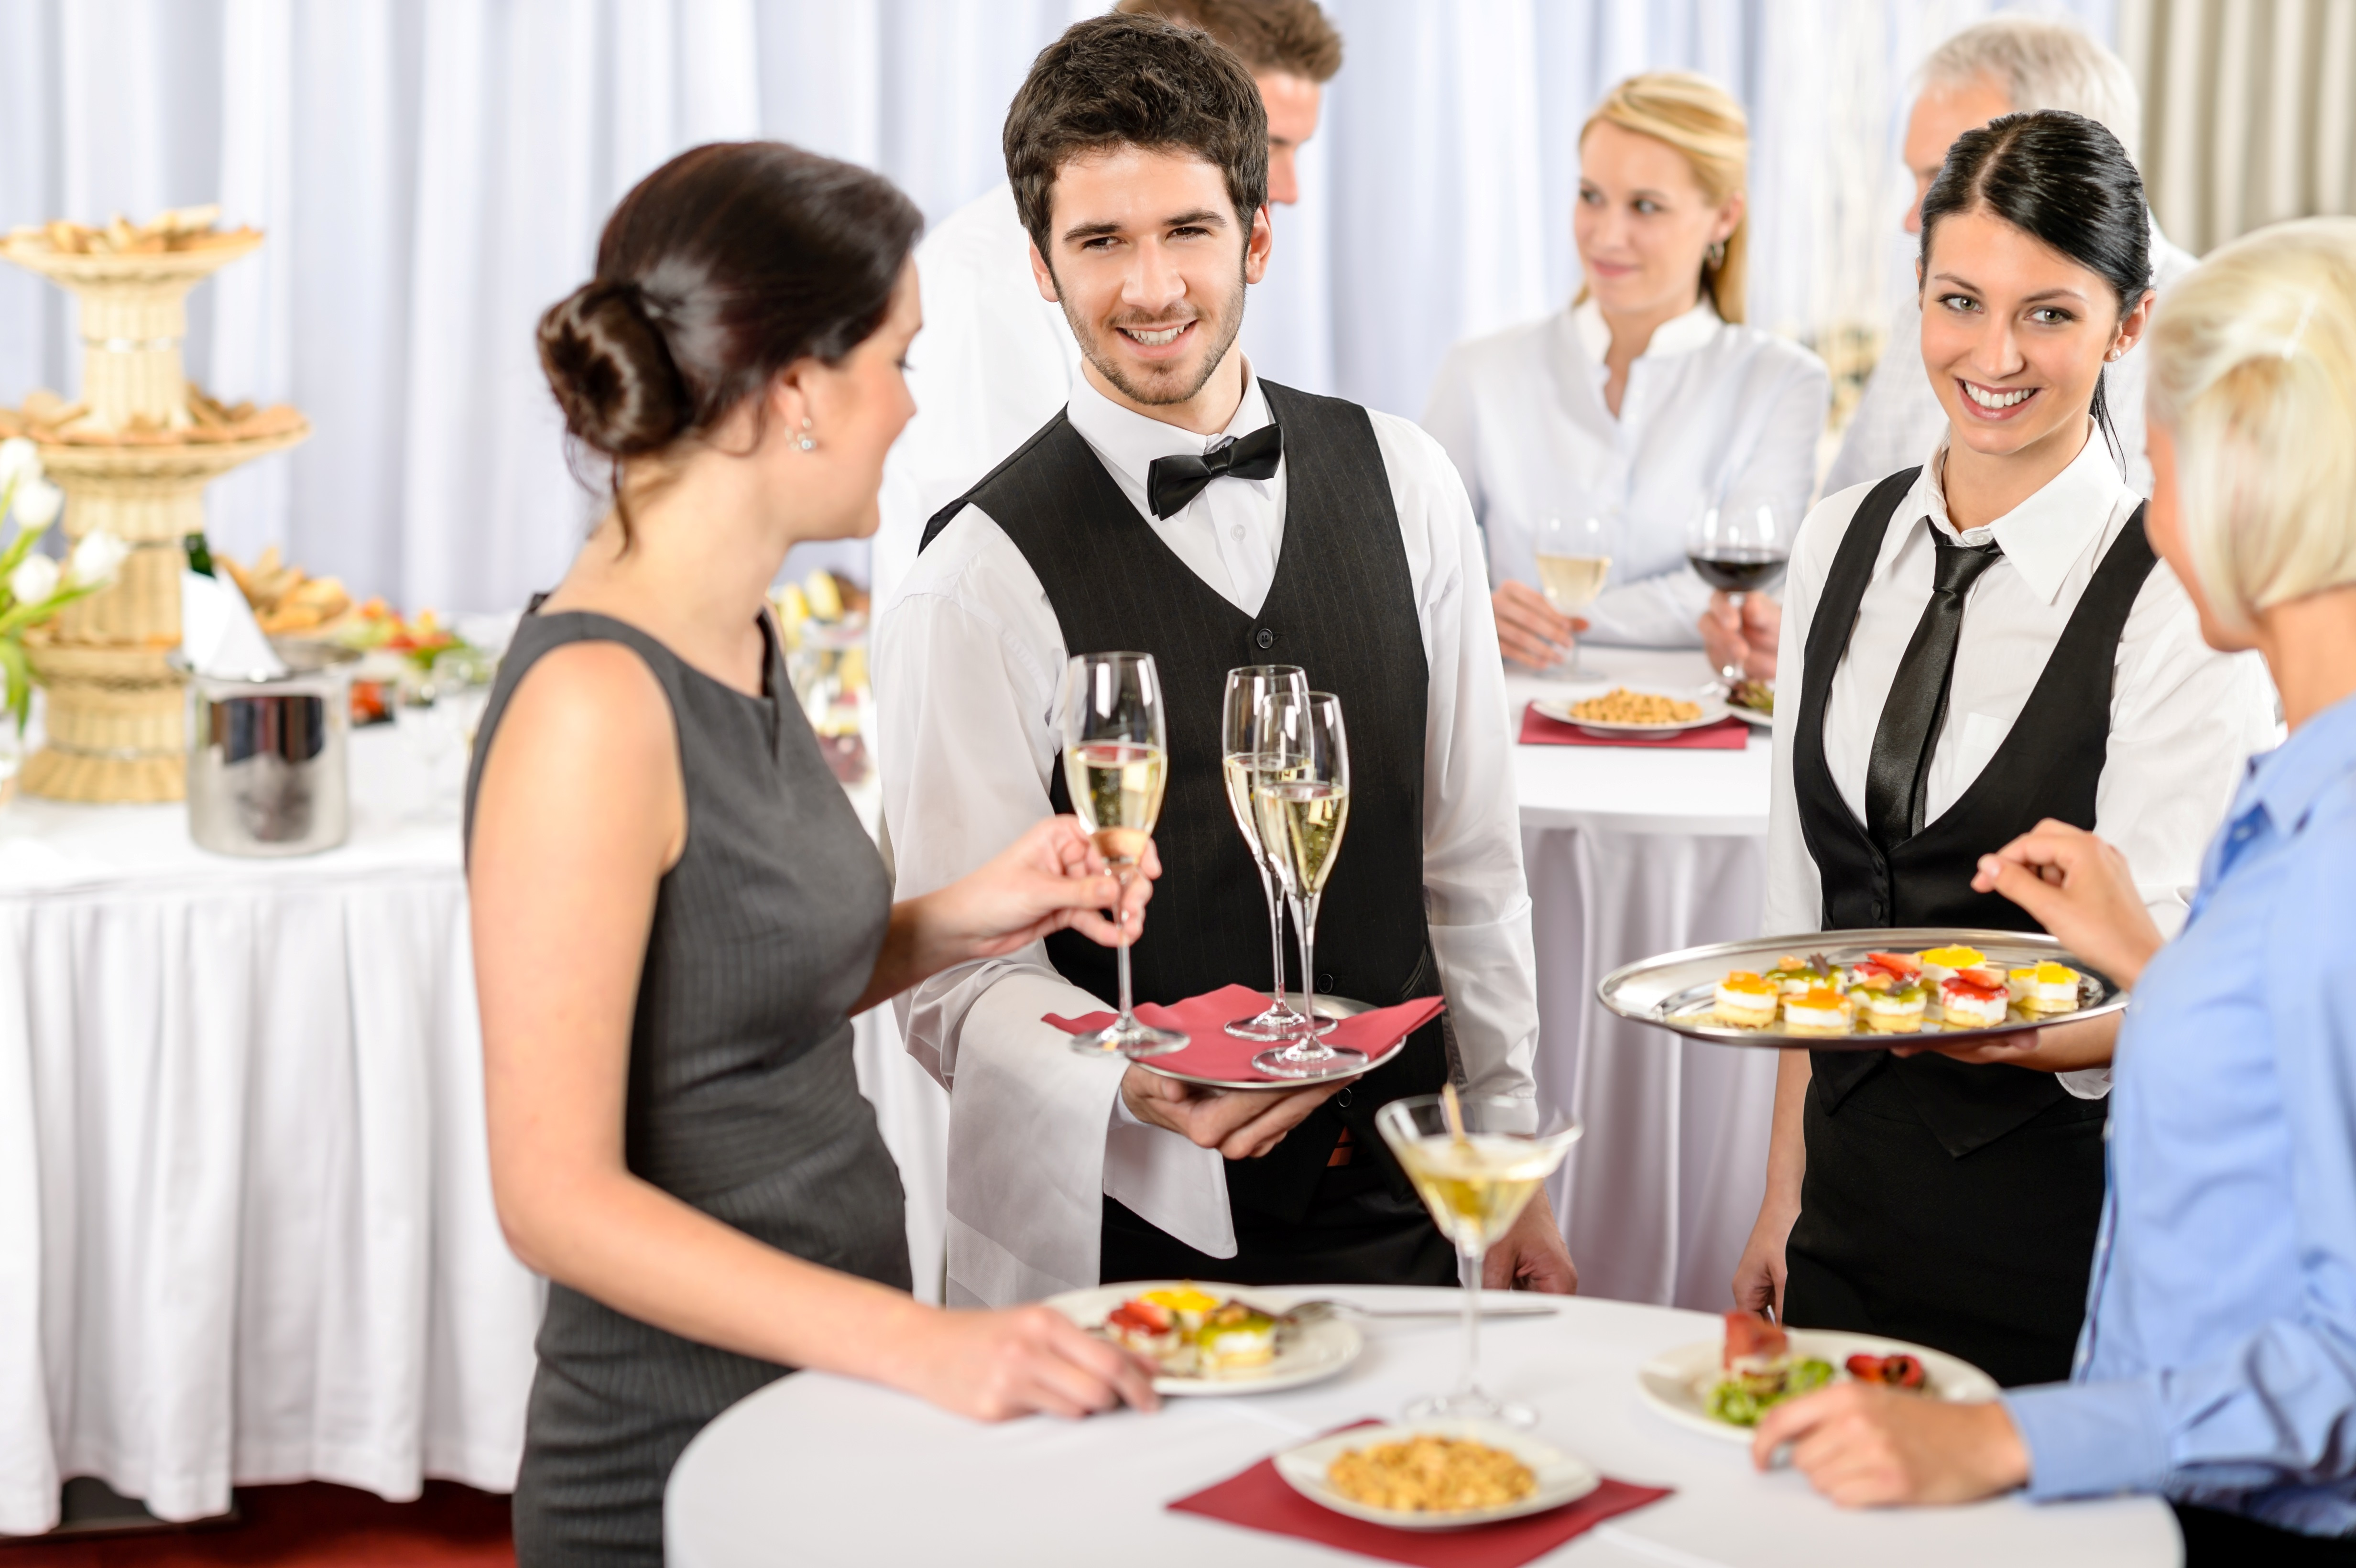 Full Service Off Premise Catering Business with Cafe